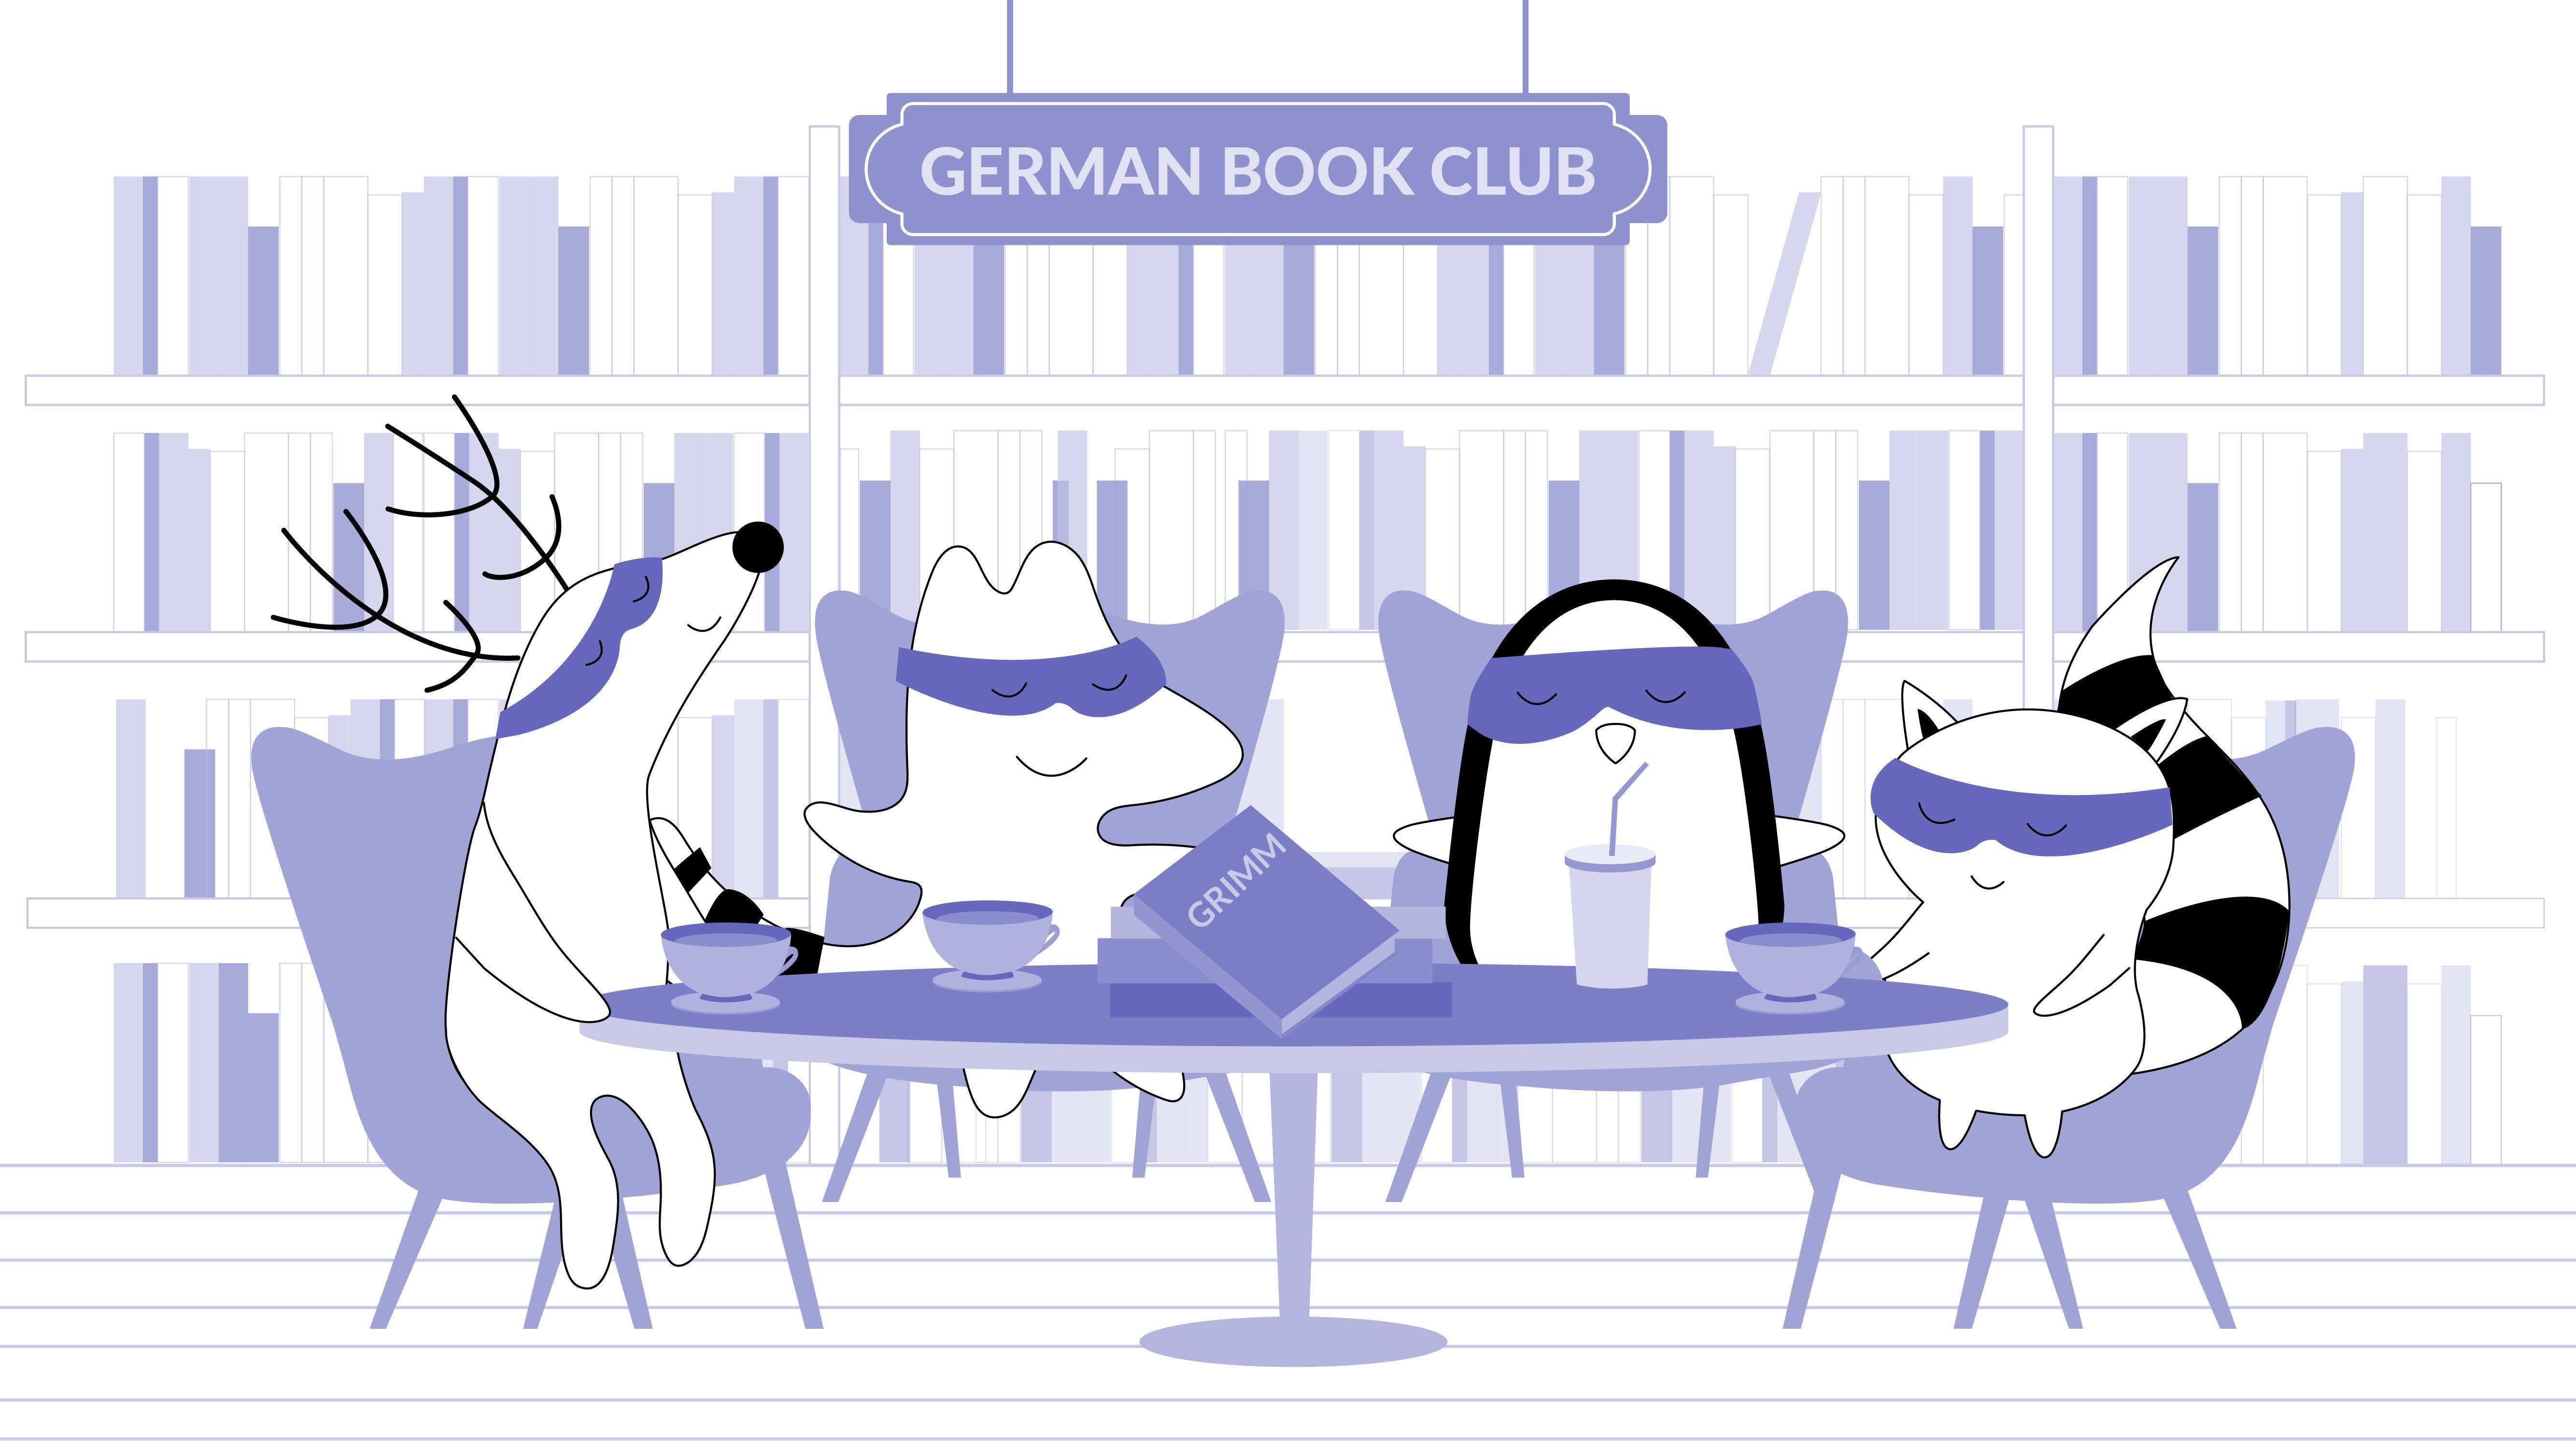 Iggy, Soren, Pocky, a Benji are at the book club meeting, discussing The Grimm Brothers' stories.